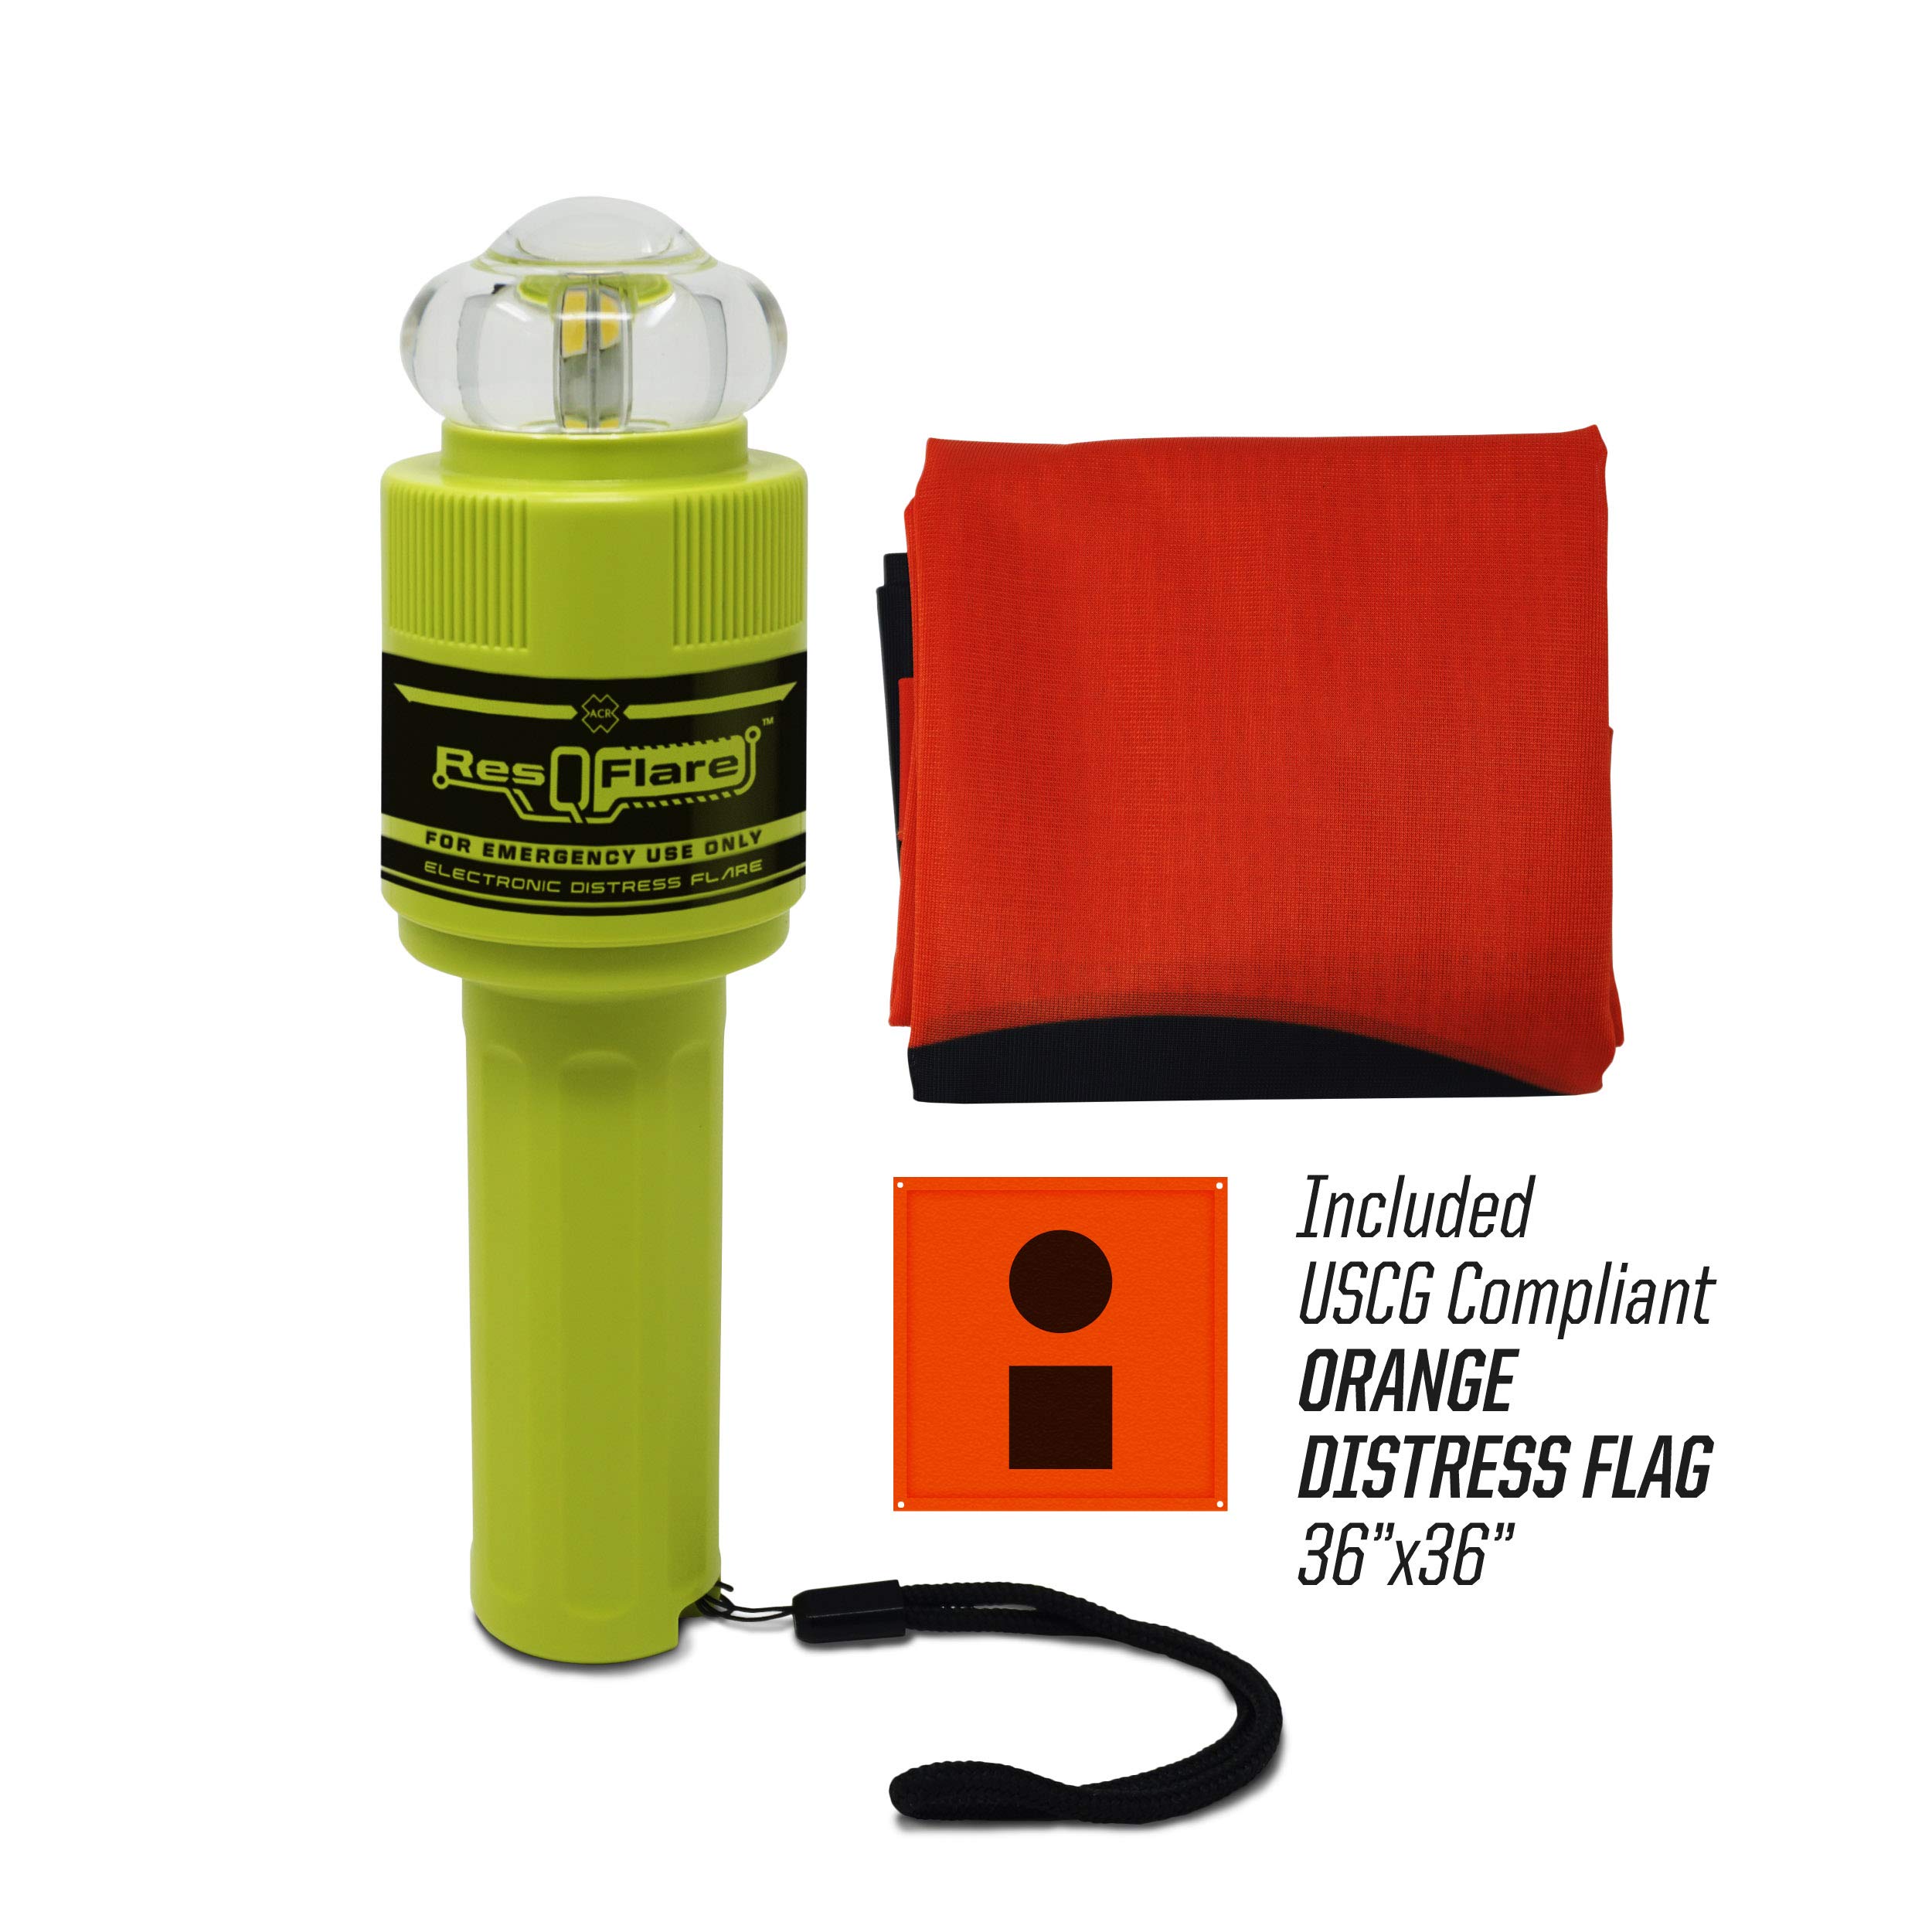 ACR ResQFlare E-Flare Safety Kit - Marine Electronic Boat Flare Meets USCG Daytime and Nighttime Coast Guard Boating Requirements